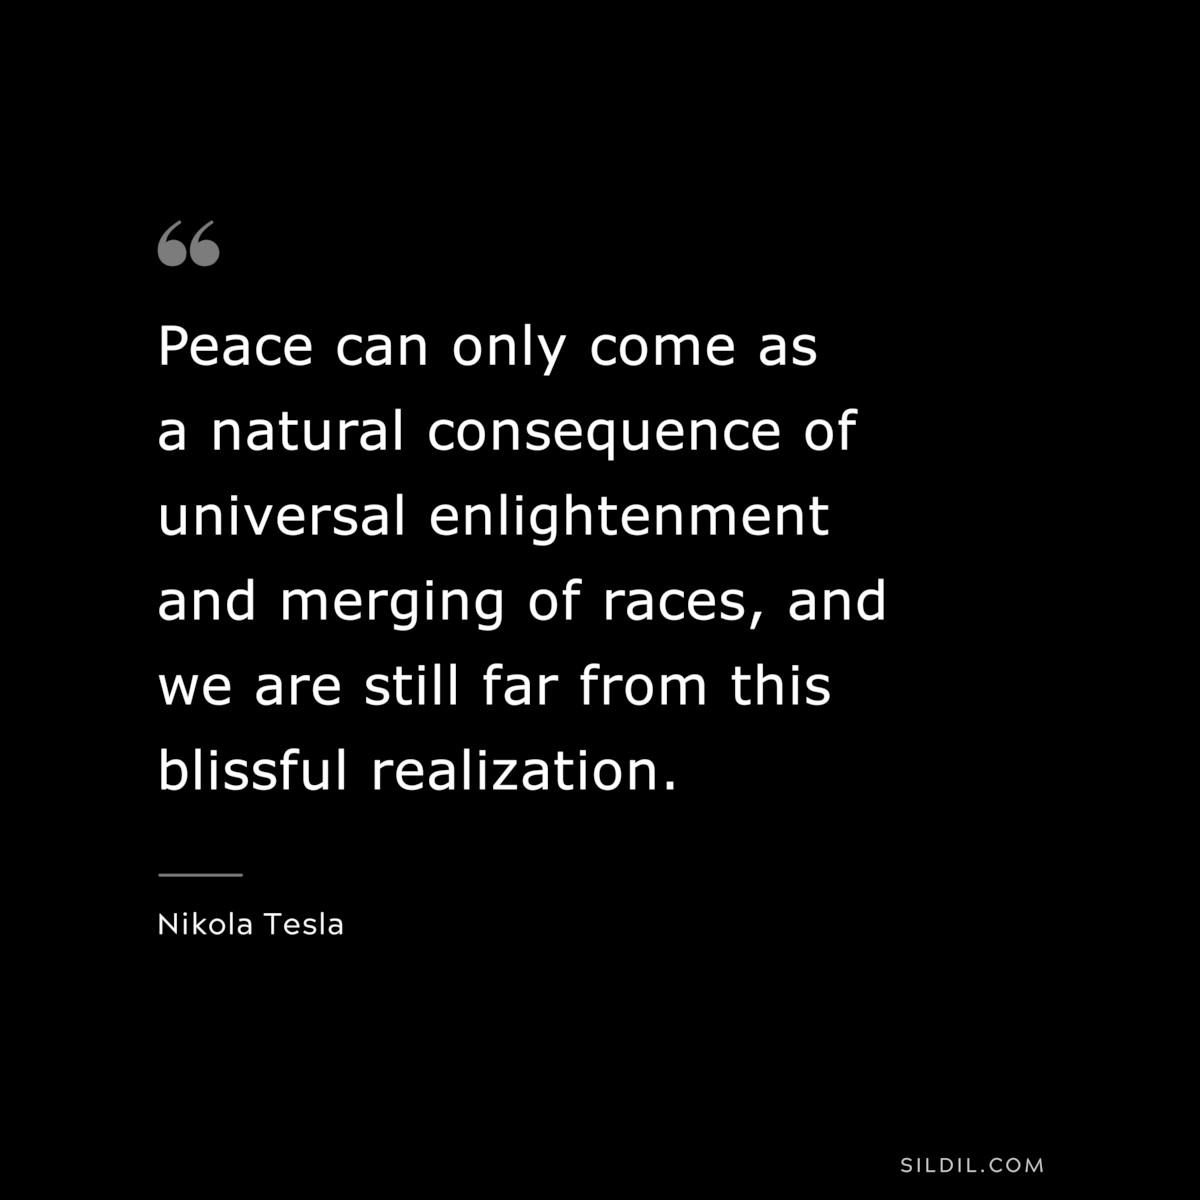 Peace can only come as a natural consequence of universal enlightenment and merging of races, and we are still far from this blissful realization. ― Nikola Tesla